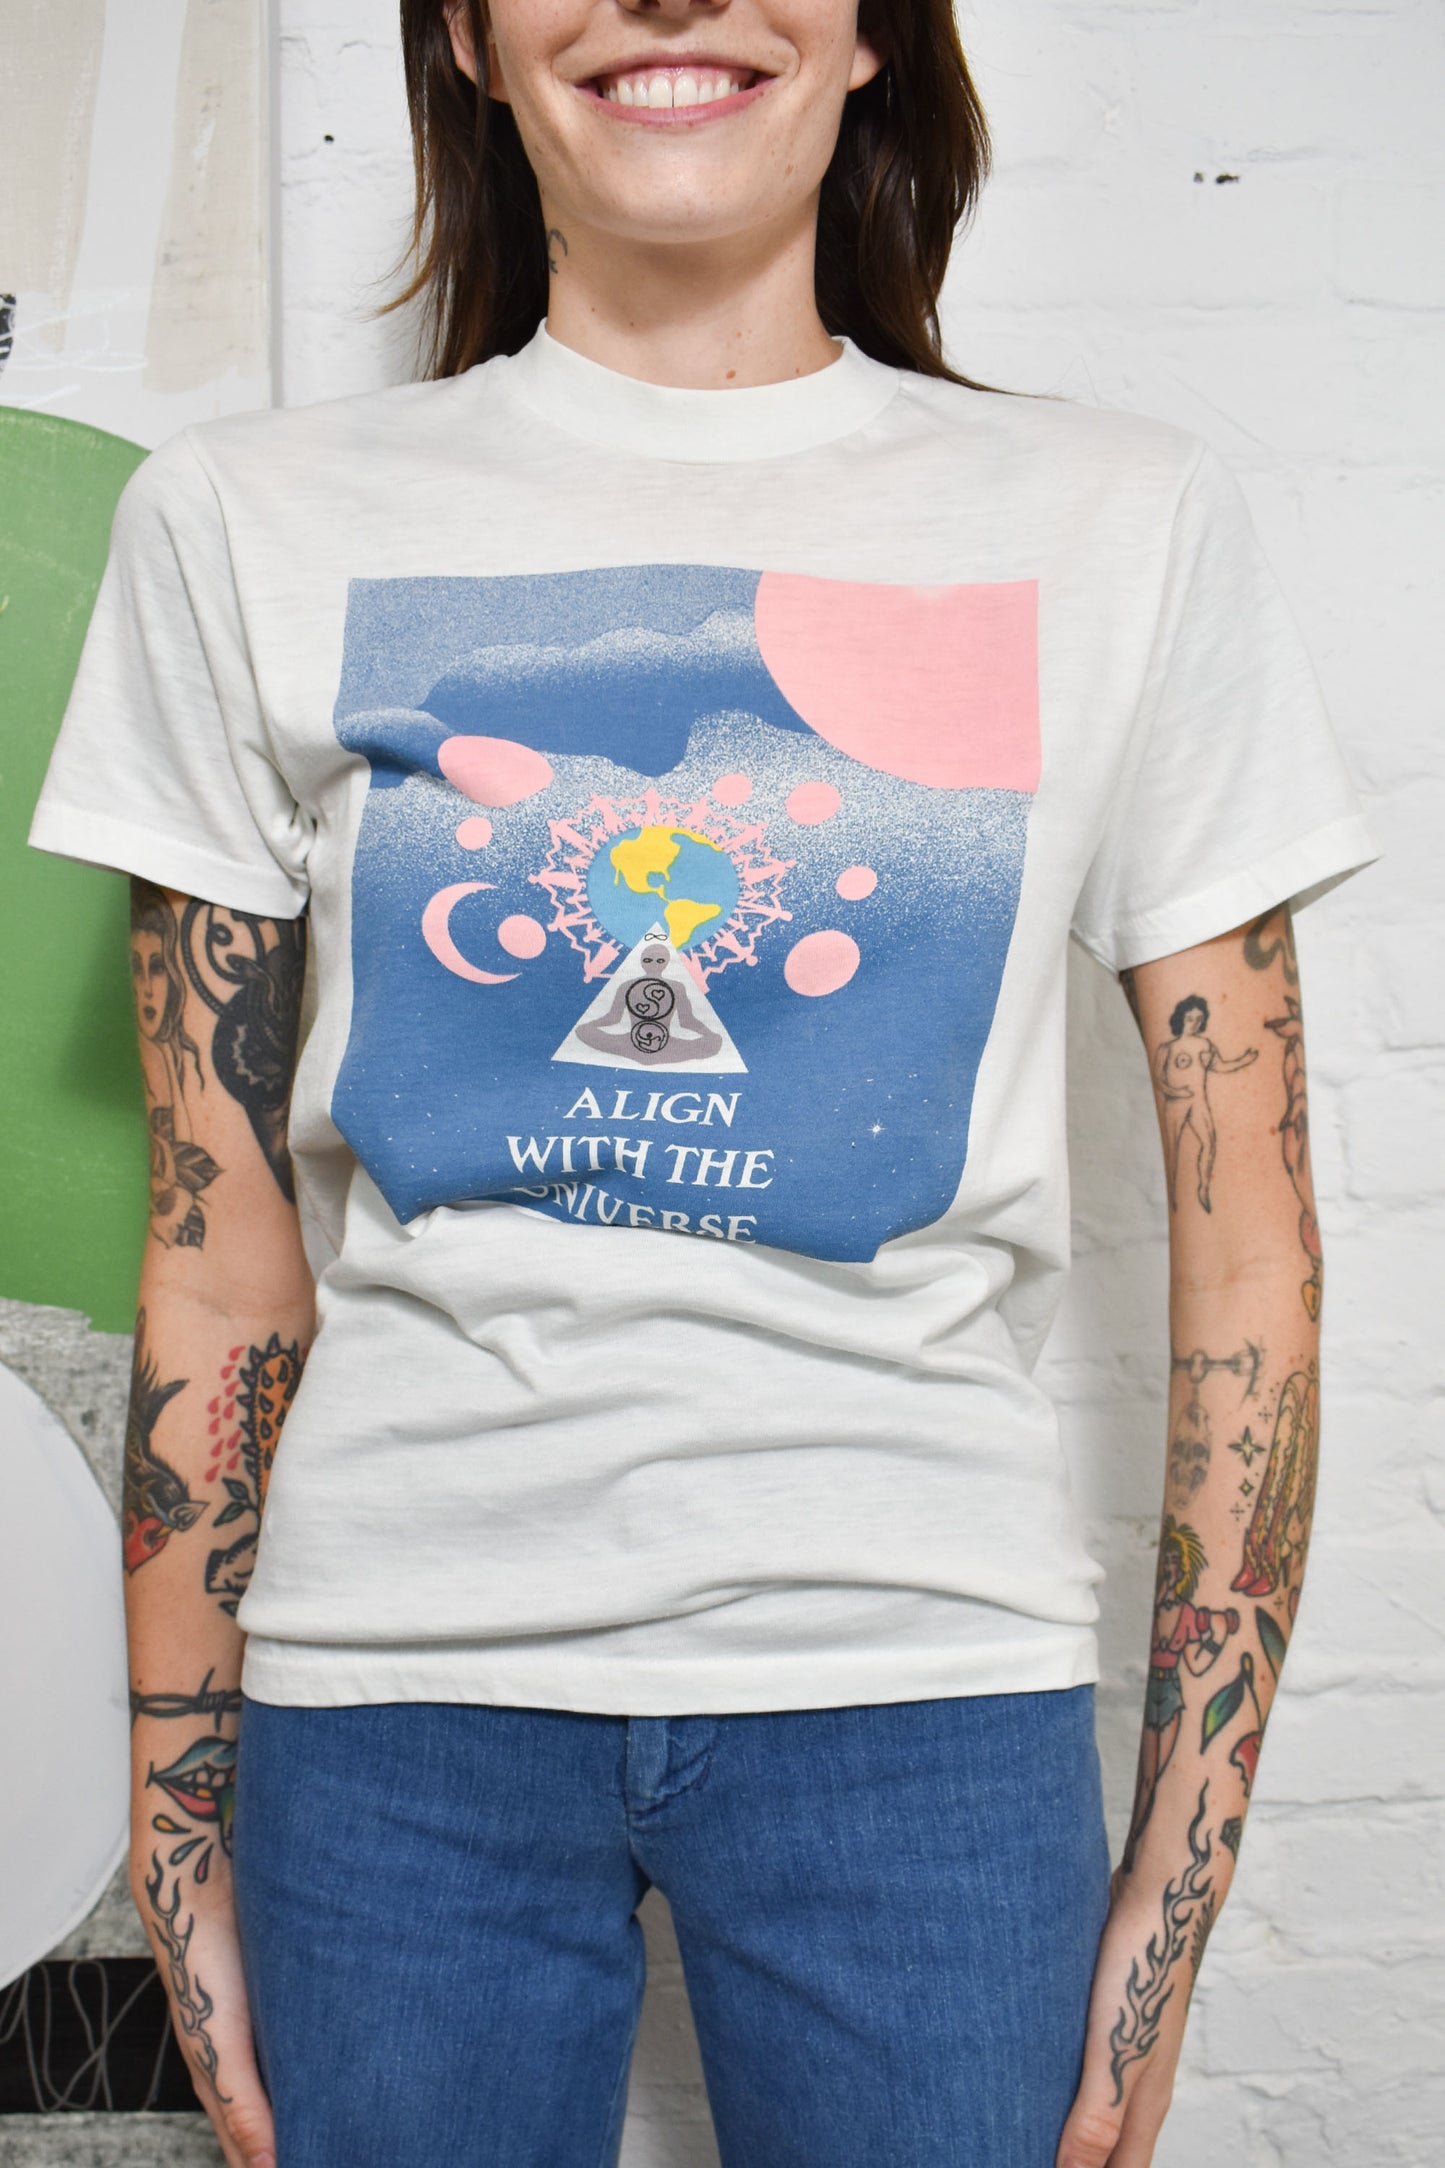 Vintage 90s "Align With The Universe" T-shirt